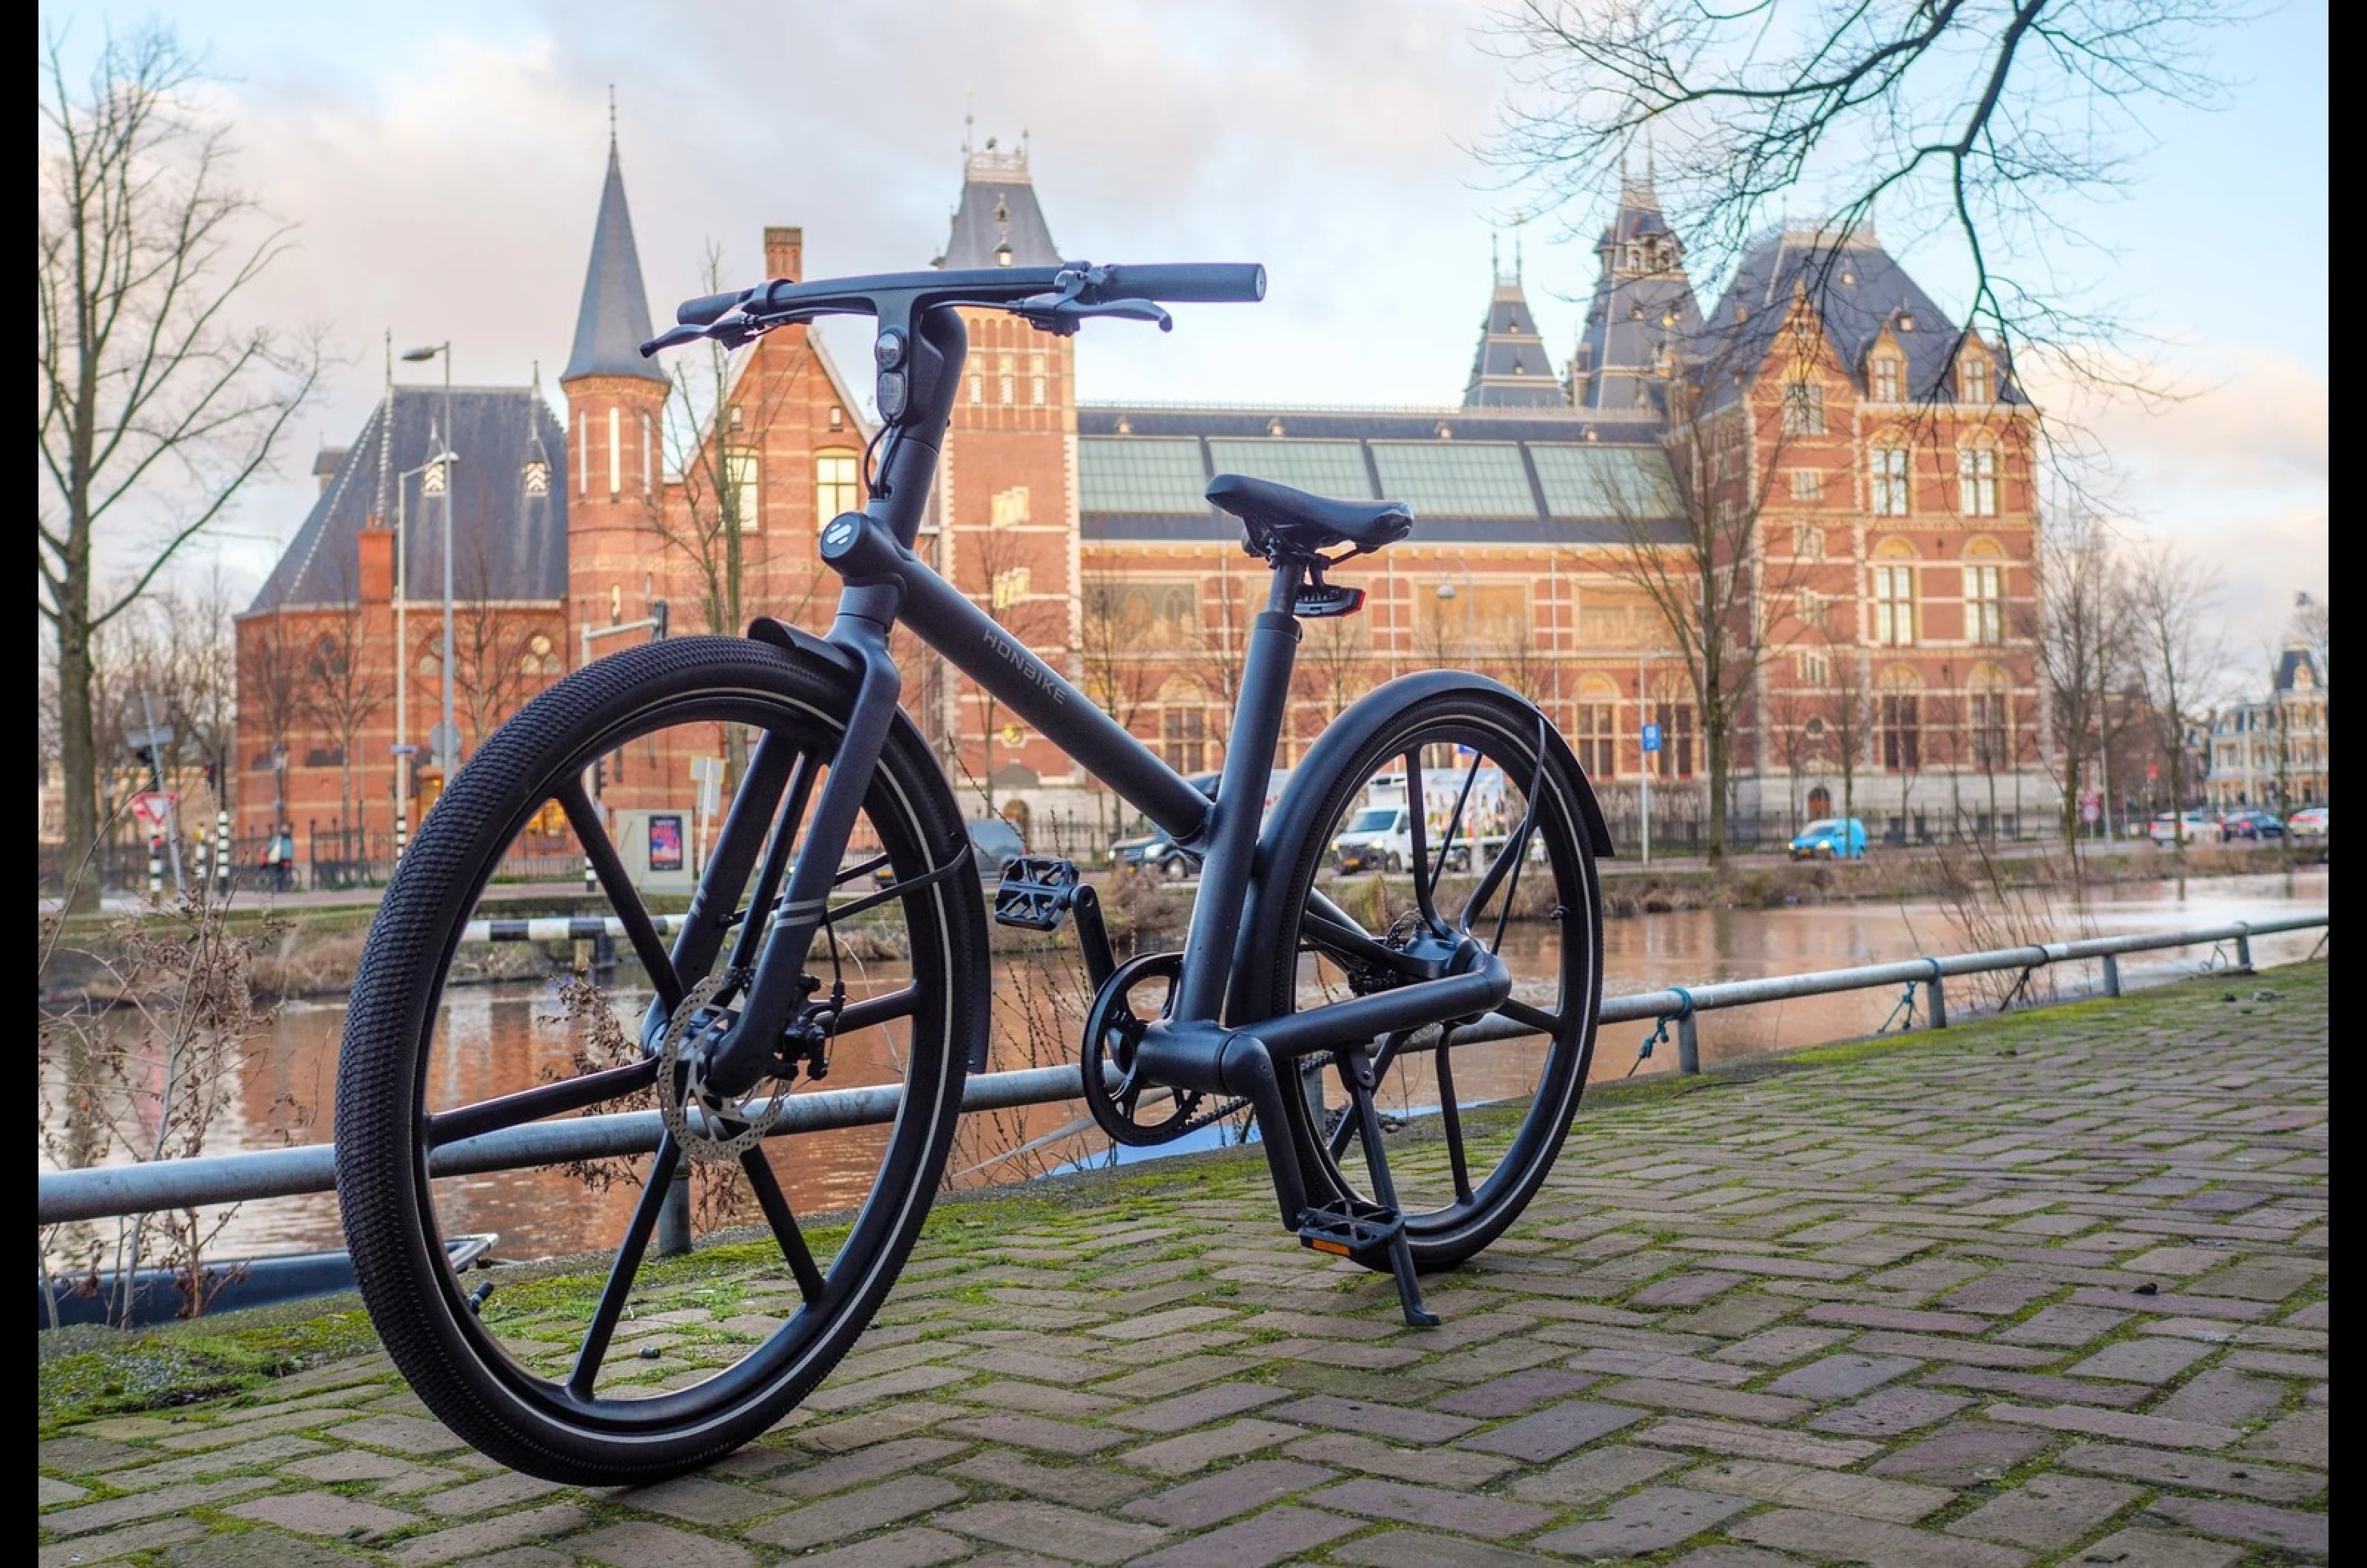 <p>With its aircraft-grade aluminium frame, the Uni4 weighs 20.2kg. A 250w electric motor with 33lb ft powers the rear wheel while a 432Wh lithium-ion battery gives a range of 62 miles and takes around 4.5 hours to charge. Riders have an option of three modes: Eco, City and Sport. The Uni4 also comes equipped with a headlight and rear light, an LED screen to show speed, Bluetooth connectivity and a high water-resistance rating of IPX6. The Uni4 currently costs $1699 in the US and is spotted for £1799 in the UK. </p>